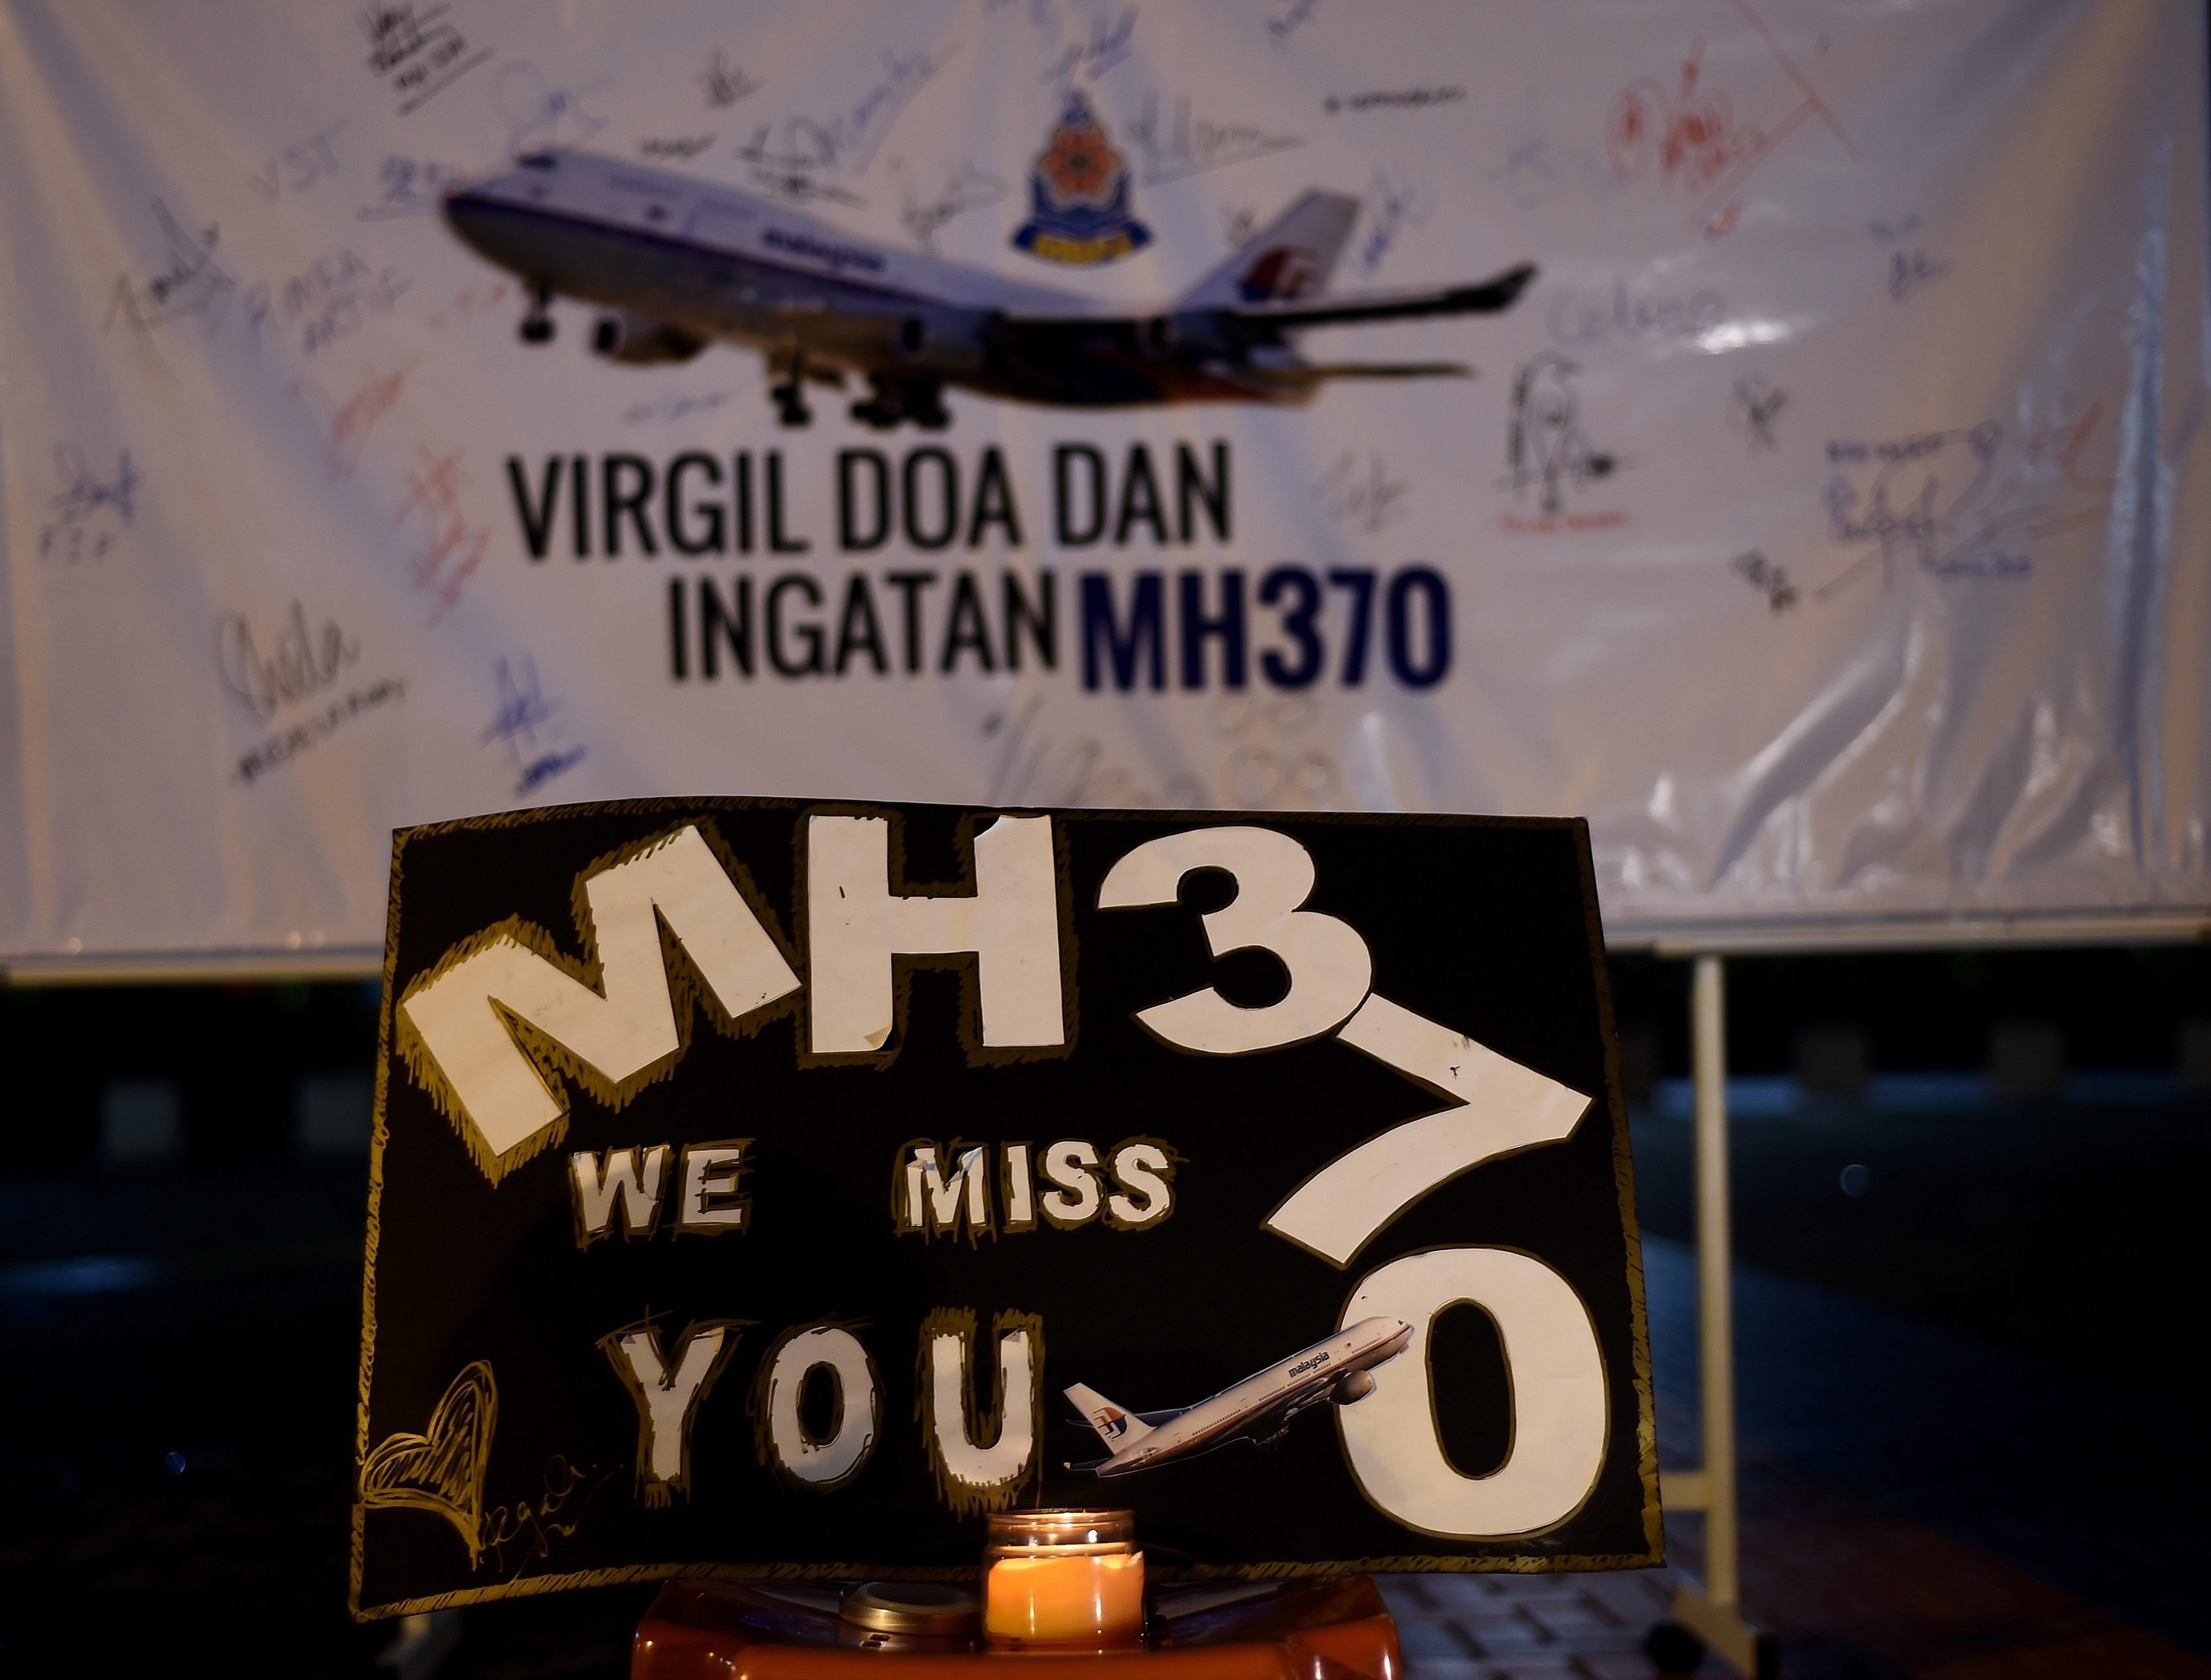 A board bearing solidarity messages is seen during a gathering to mark the one-year anniversary of the disappearance of Malaysia Airlines flight MH370, in Kuala Lumpur on March 6, 2015. Malaysia Airlines has increased the frequency with which its aircraft are tracked, the carrier said on March 6, a safety enhancement spurred by the still unexplained disappearance of flight MH370 one year ago. AFP PHOTO / MANAN VATSYAYANA / AFP PHOTO / MANAN VATSYAYANA